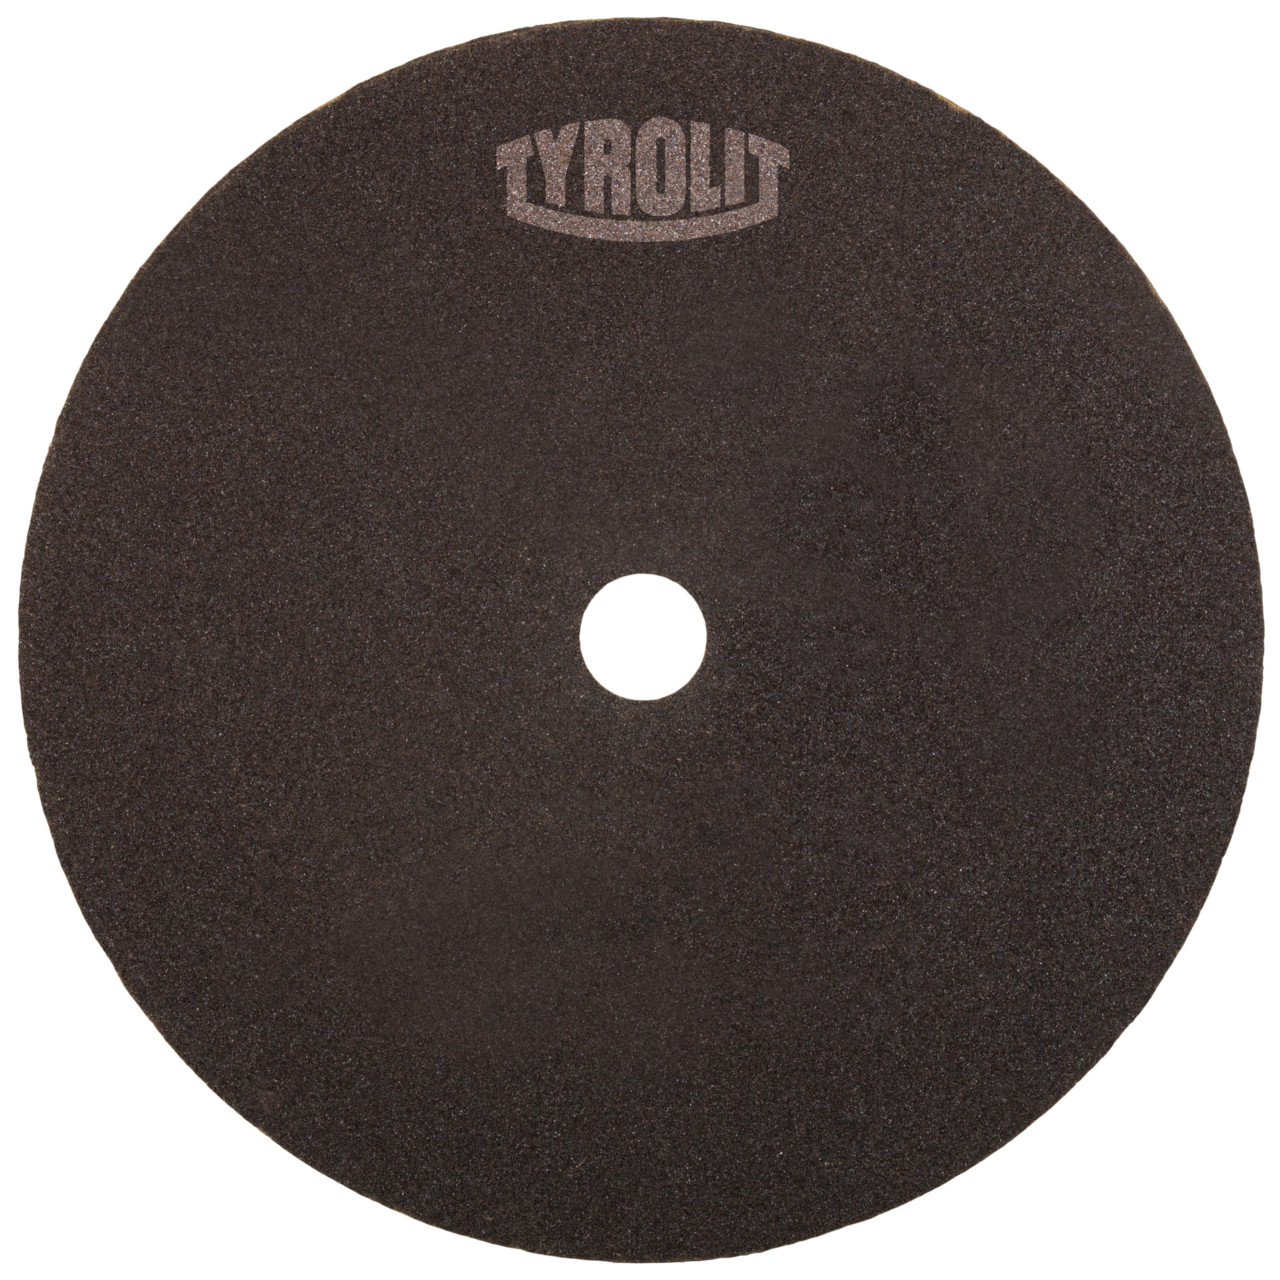 TYROLIT cut-off wheel for cutting and saw sharpening DxDxH 150x1.6x20 For steel and HSS, shape: 41N - straight version (non-woven cut-off wheel), Art. 42808